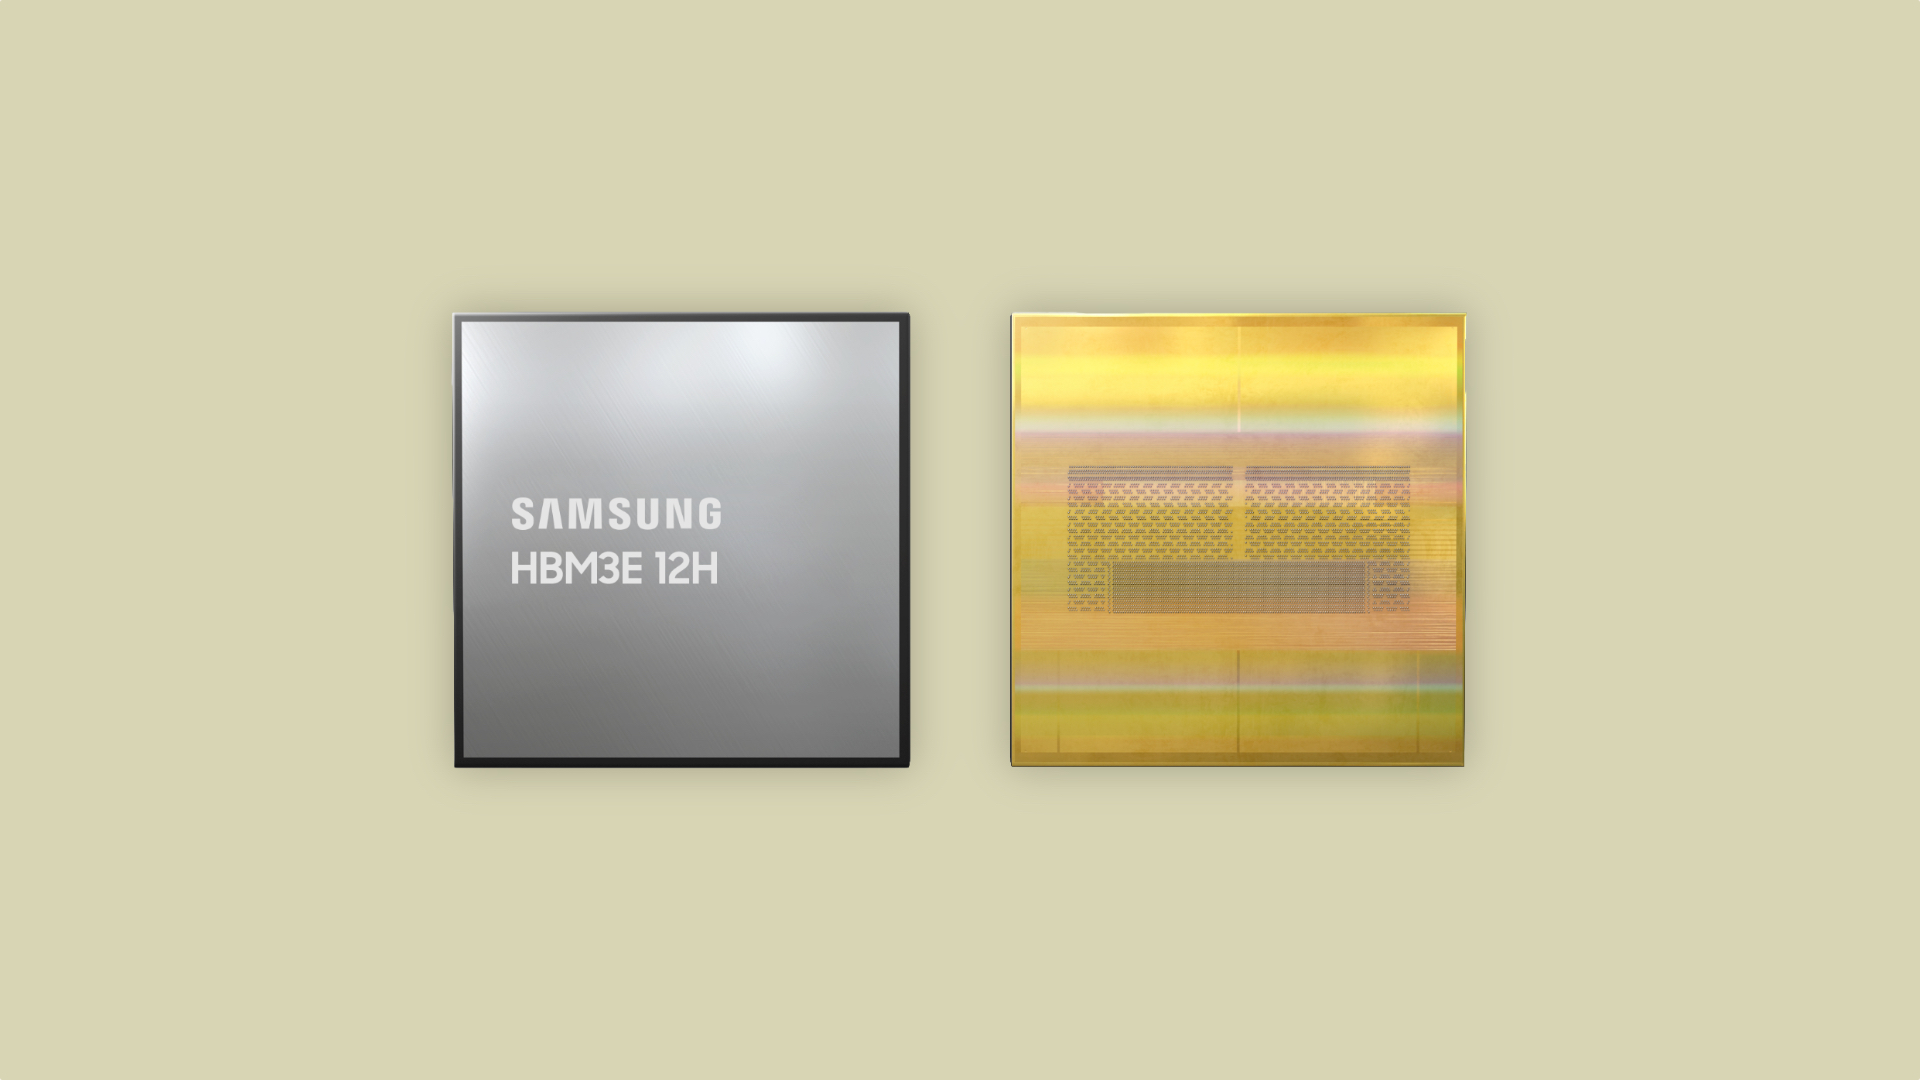 Samsung HBM3 chips failed Nvidia tests due to heat and power issues